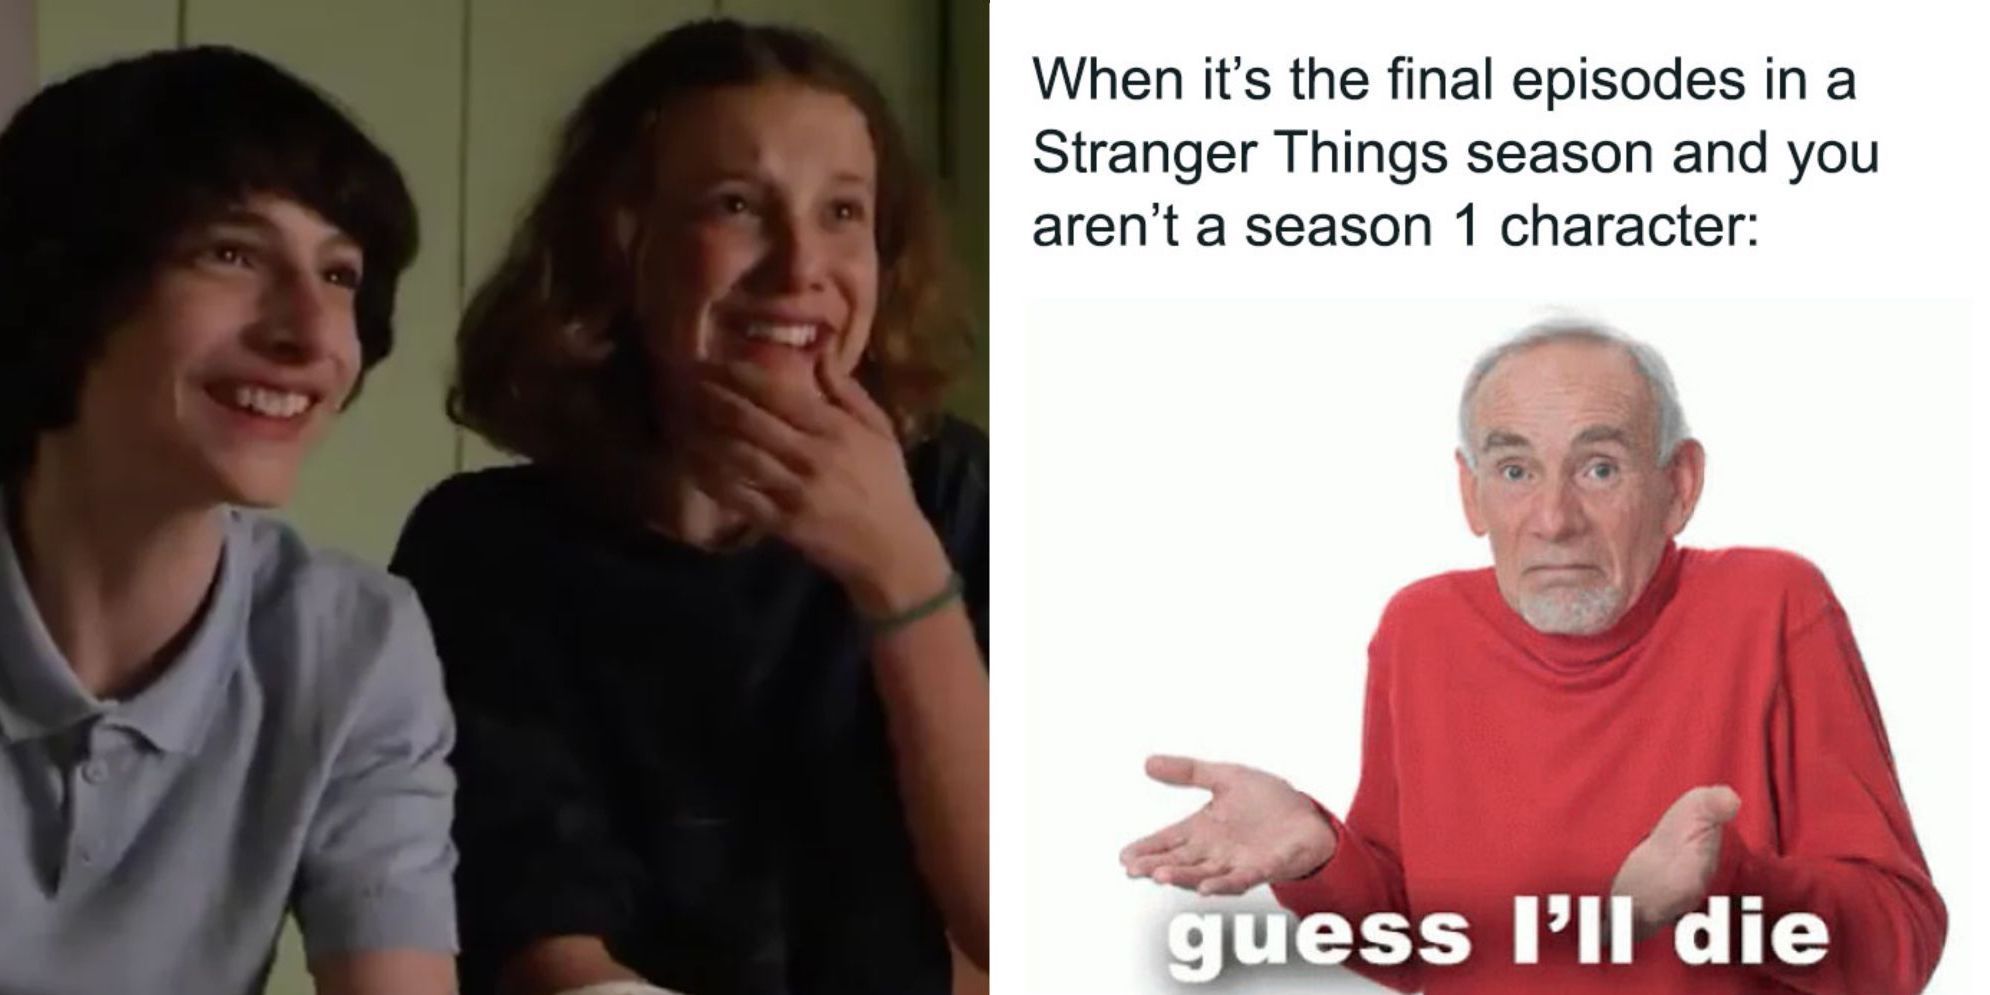 15 Stranger Things Memes That Perfectly Sum Up The Show